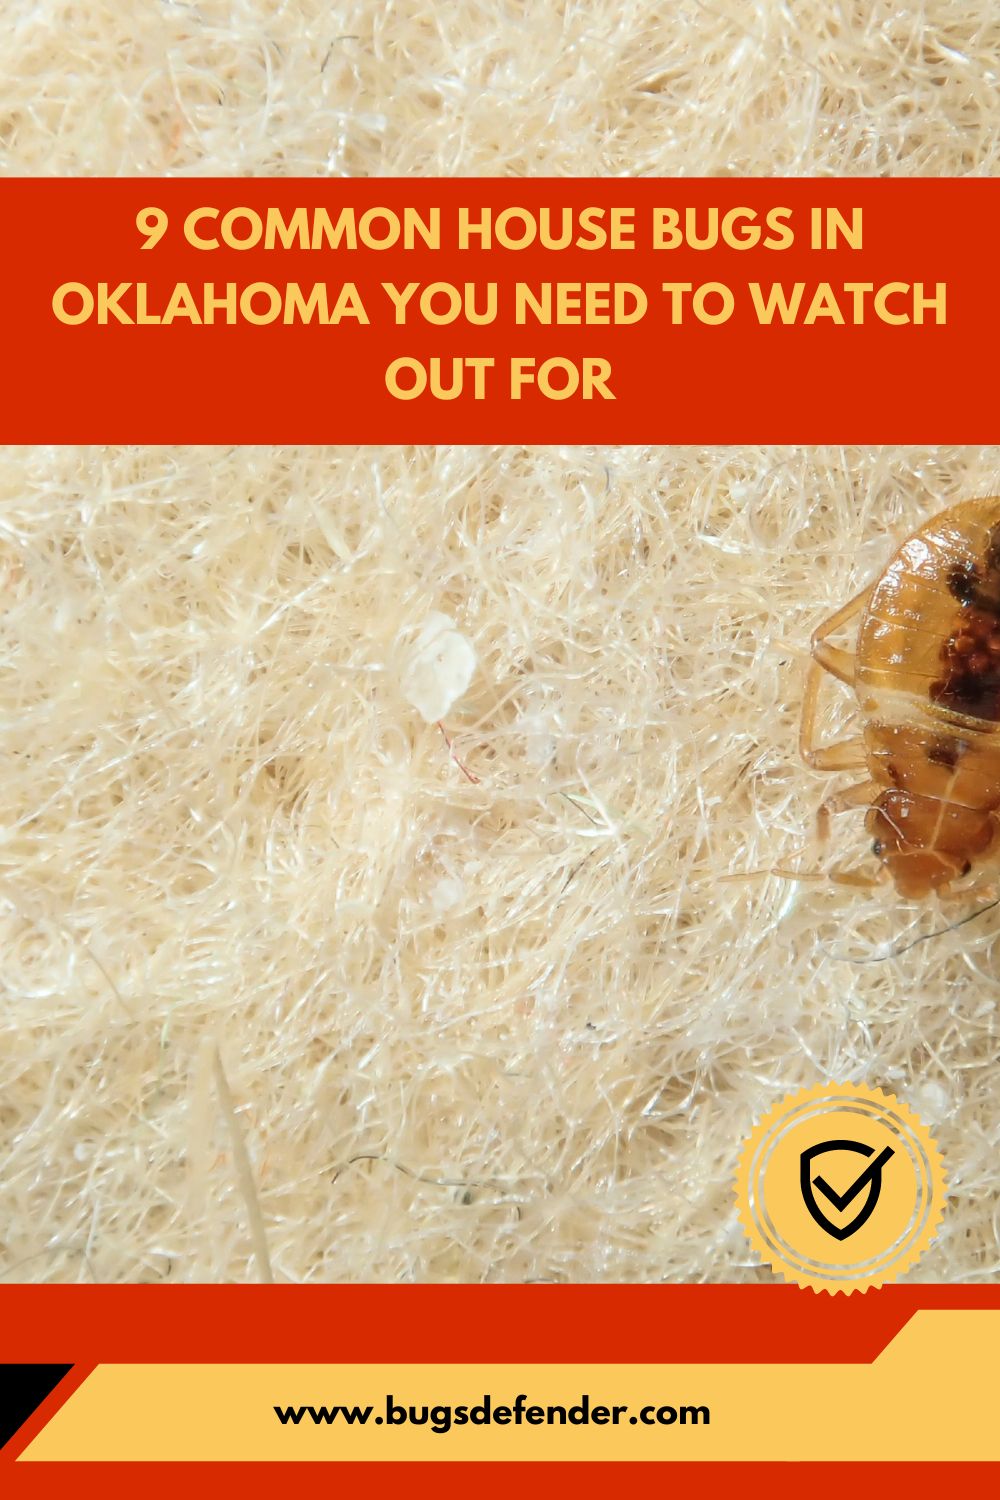 9 Common House Bugs In Oklahoma You Need To Watch Out For pin2